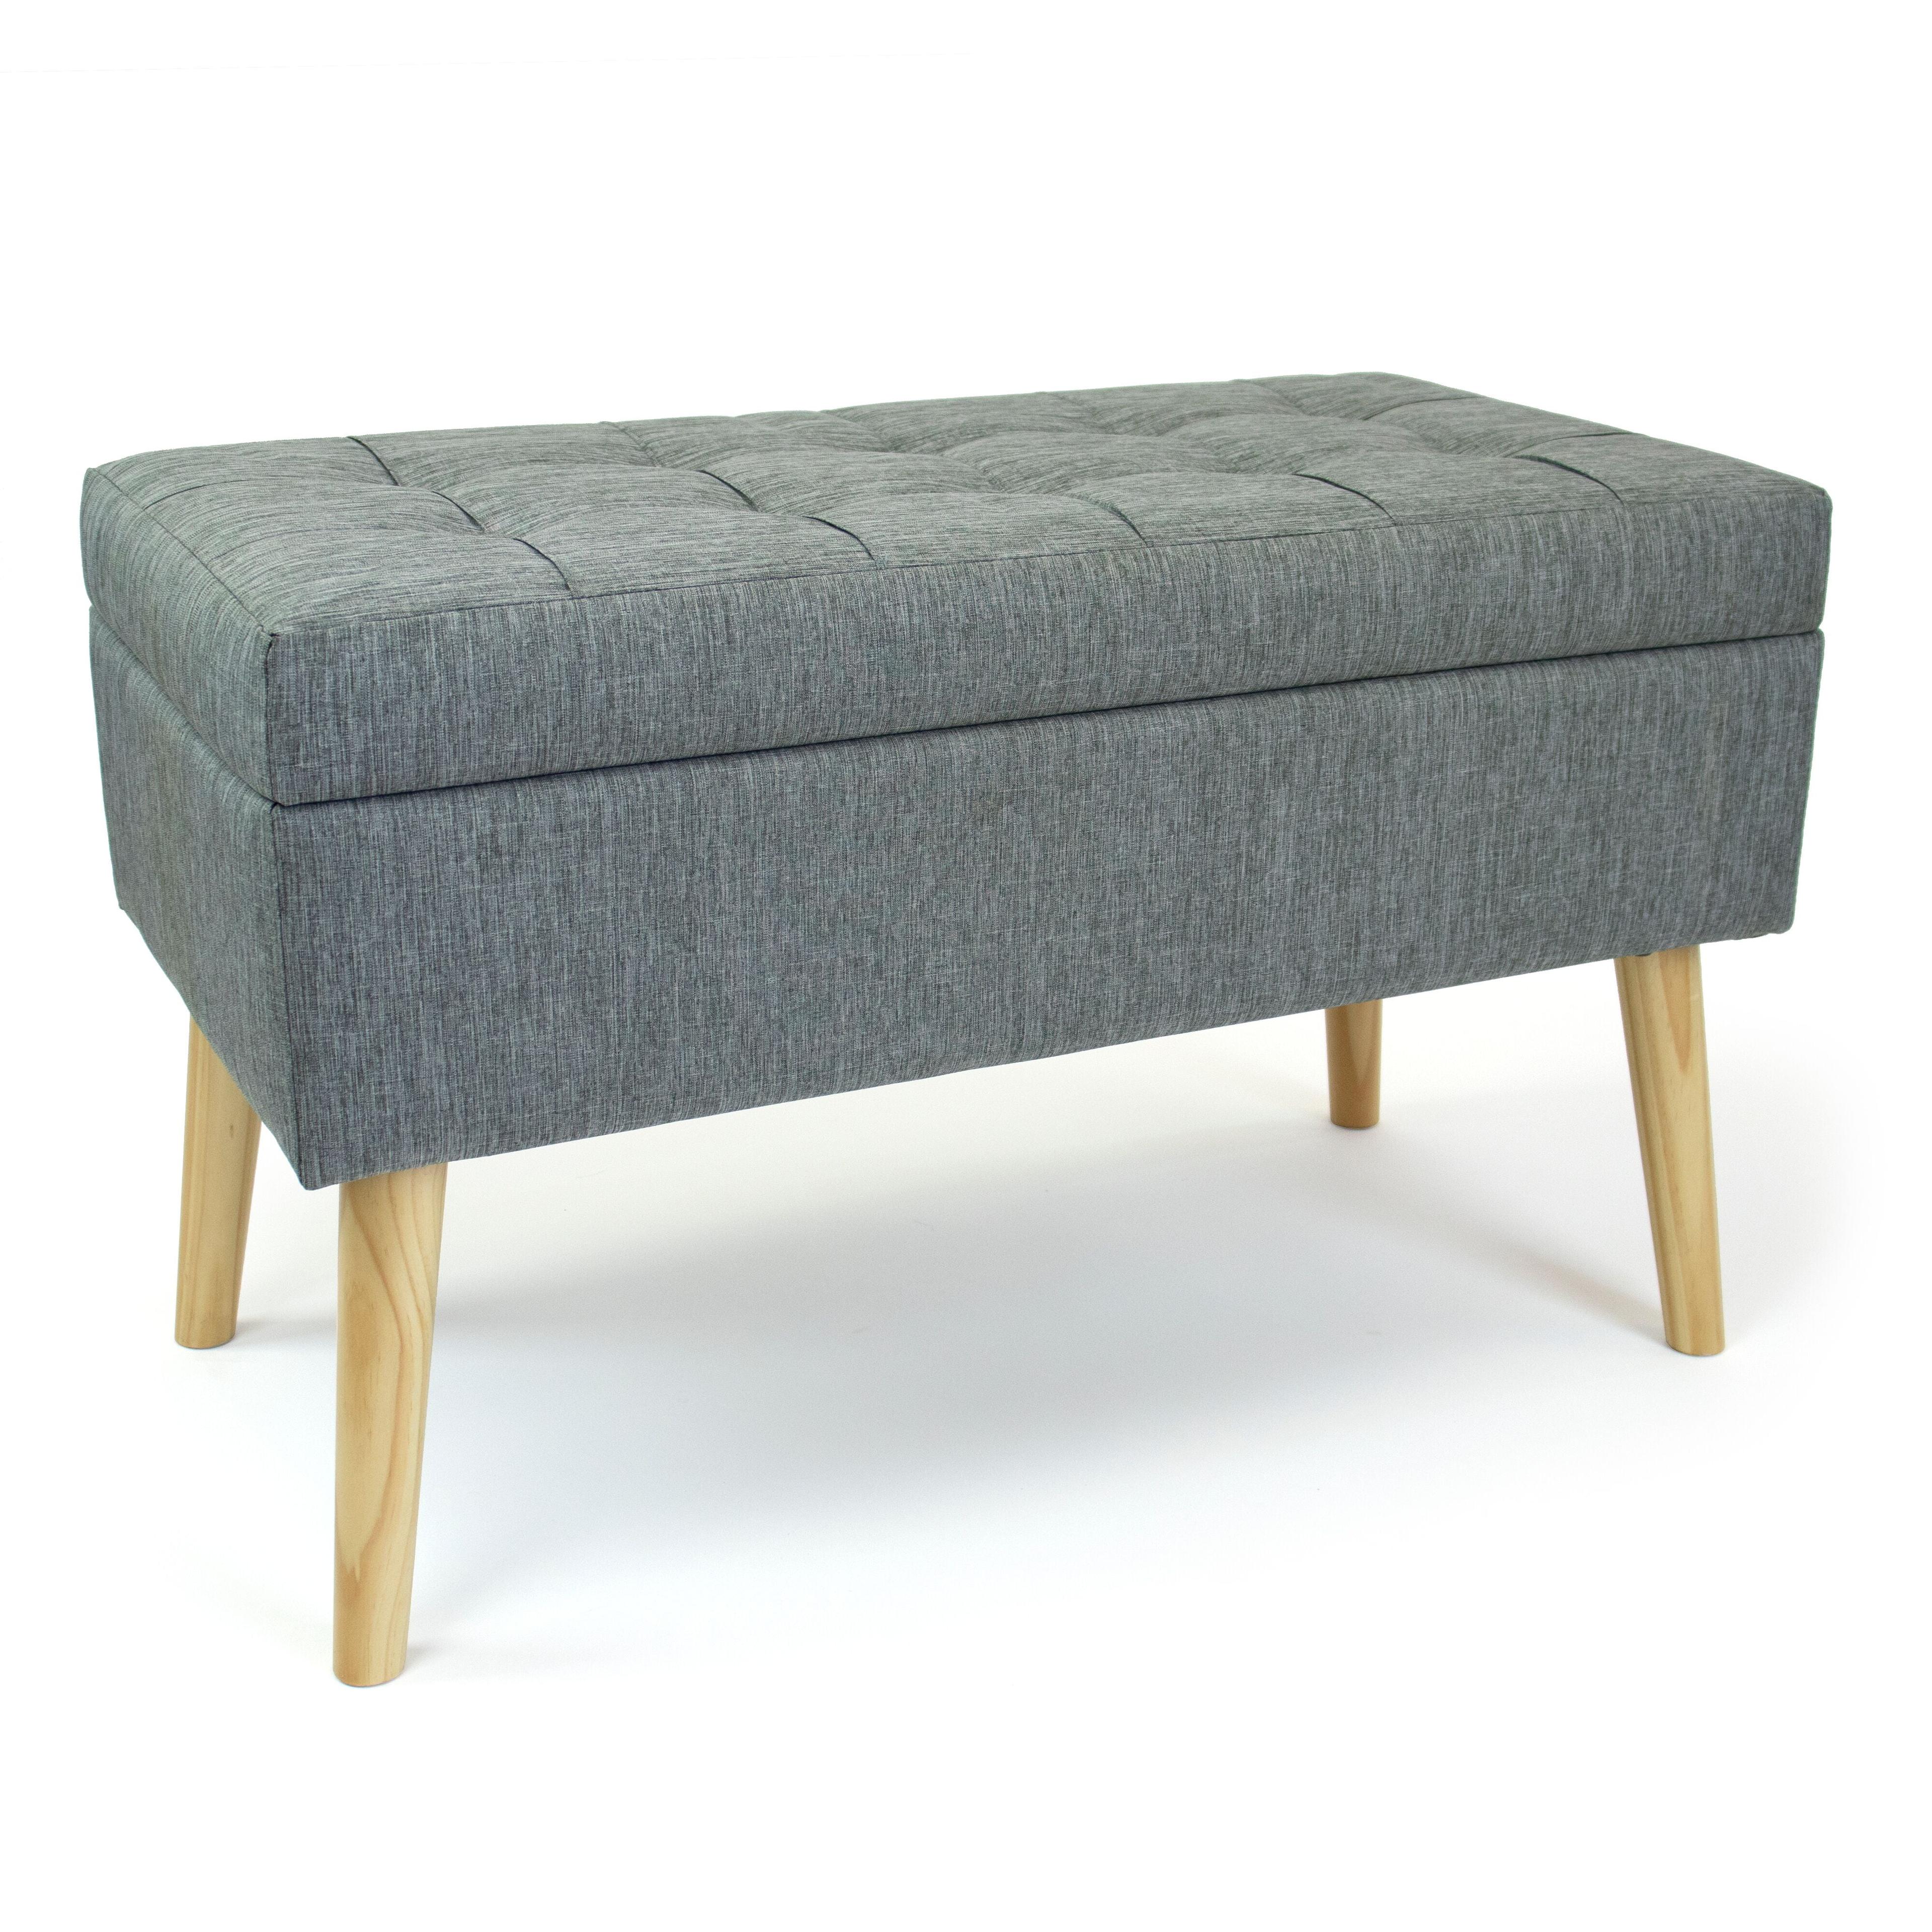 Contemporary Natural Wood Tufted Storage Ottoman with Tapered Legs